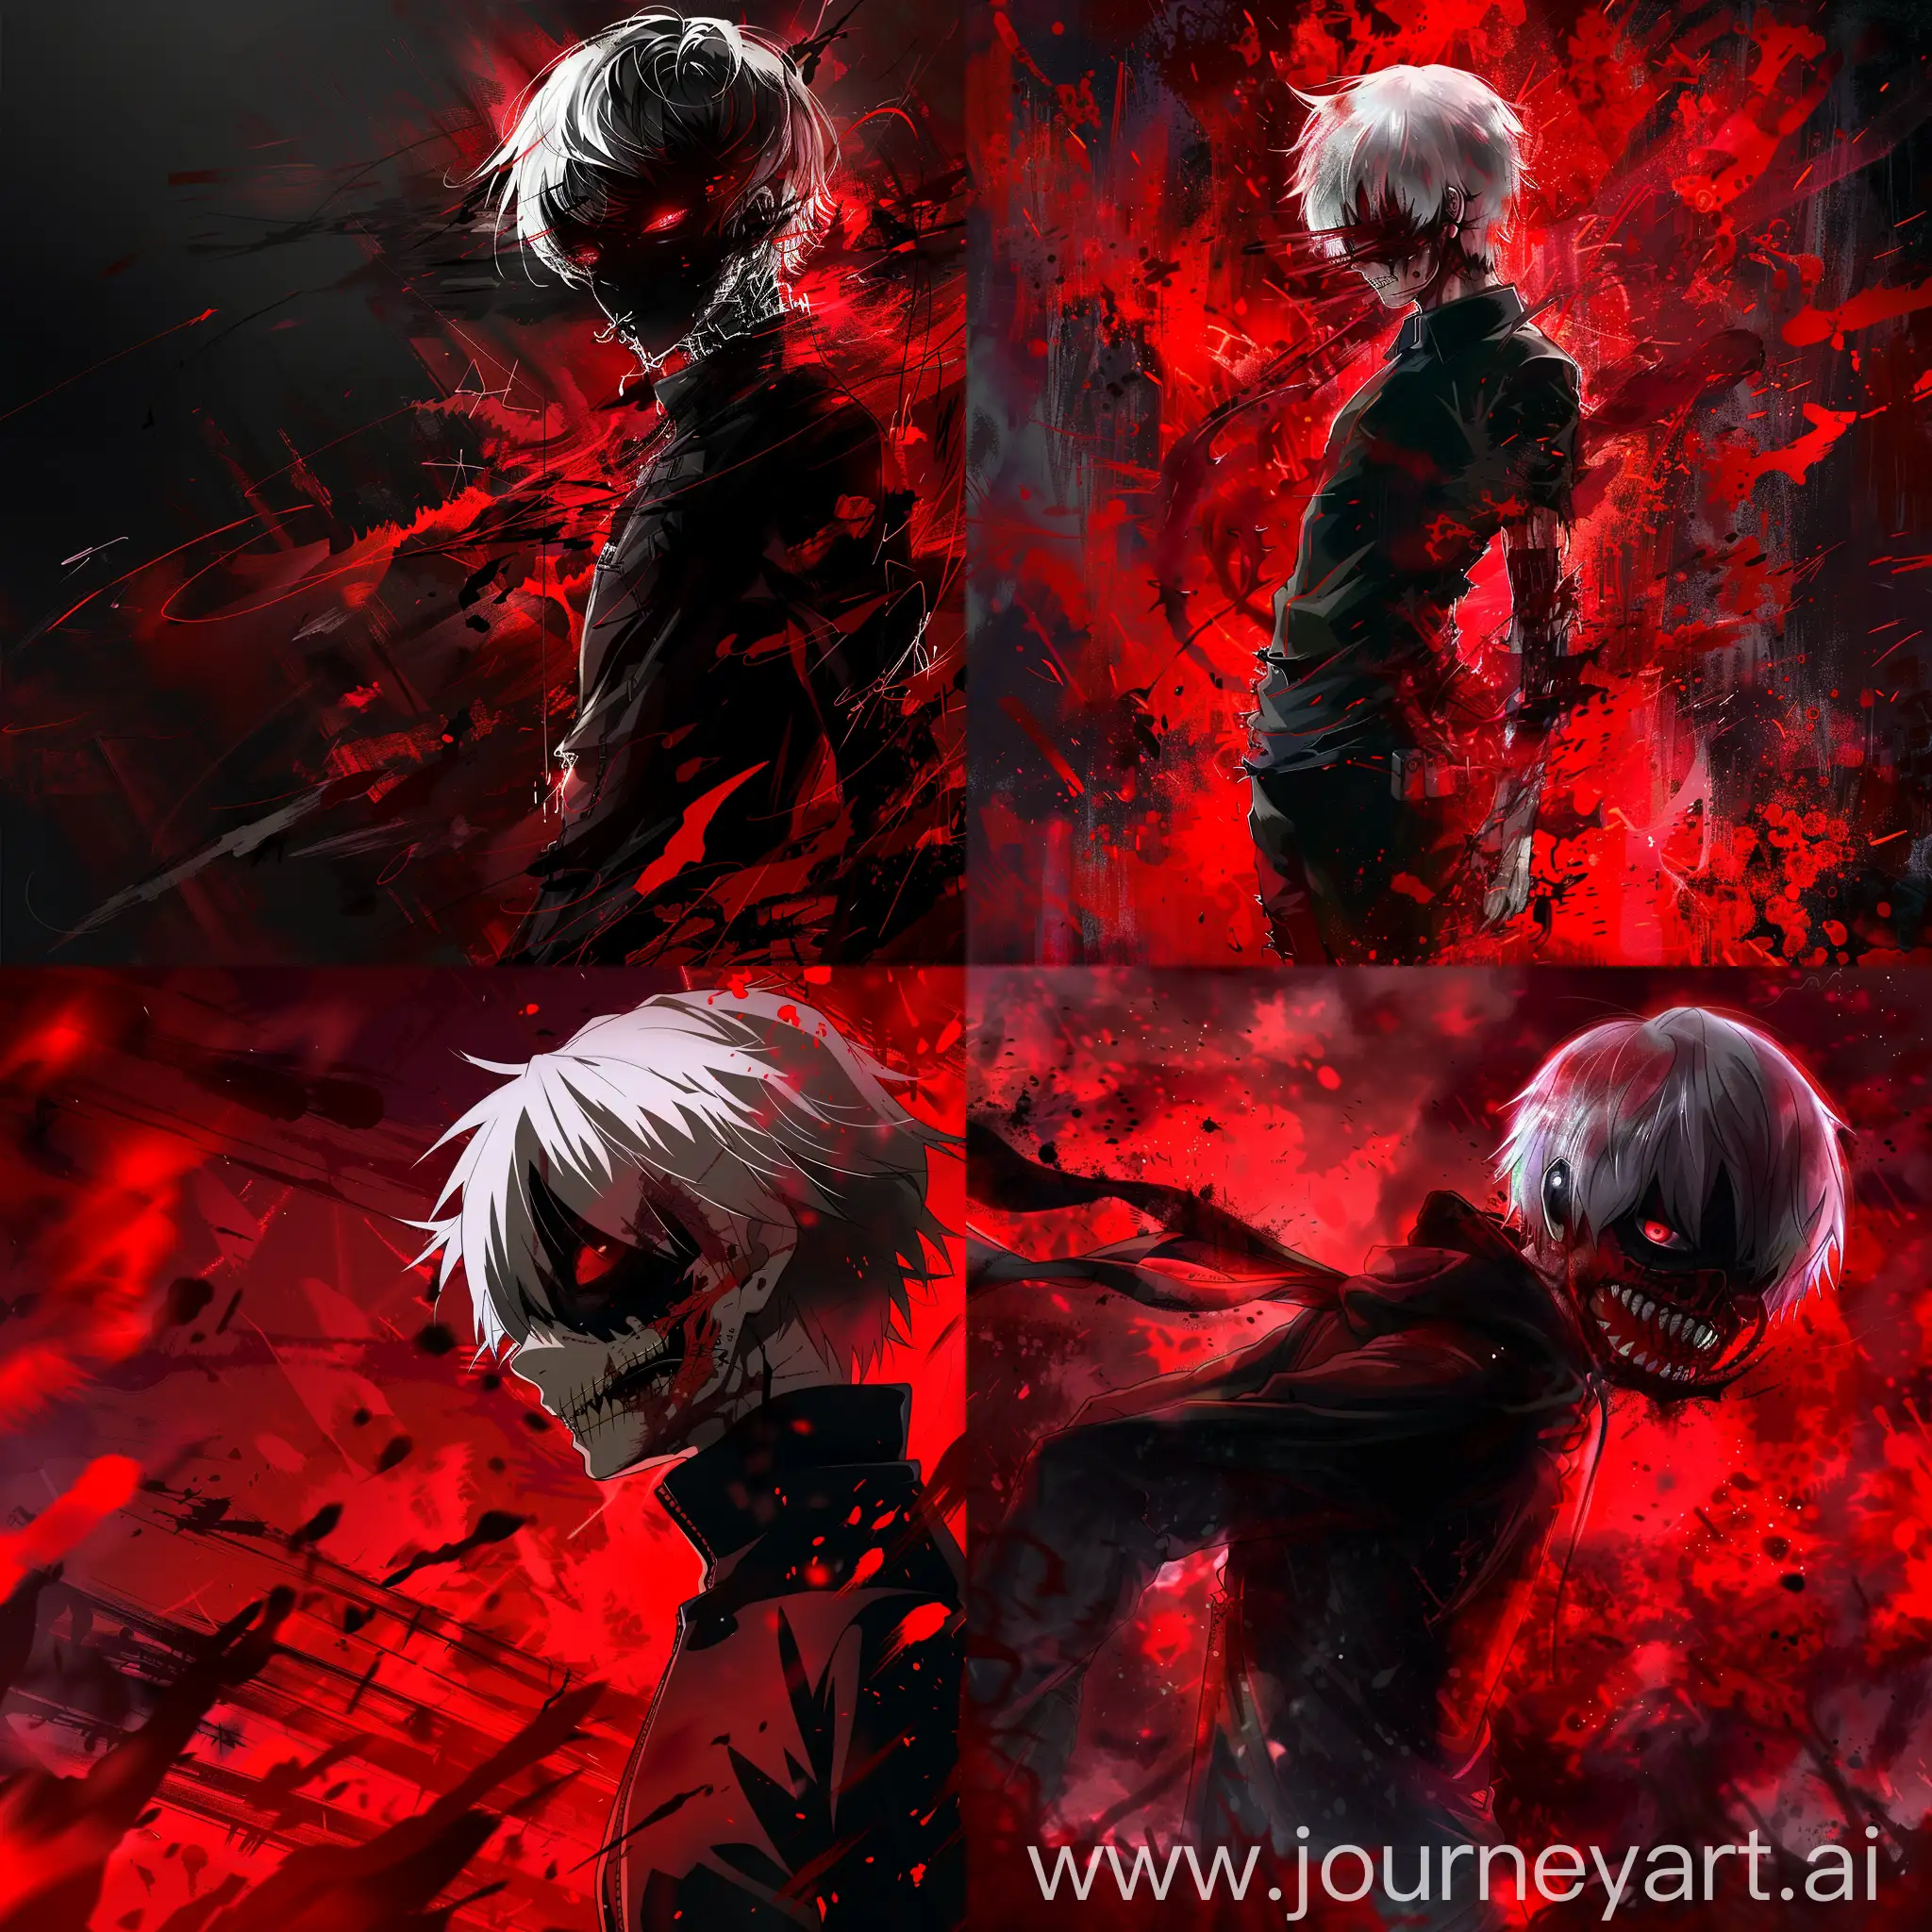 Menacing-Tokyo-Ghoul-Anime-Wallpaper-Red-and-Black-Themed